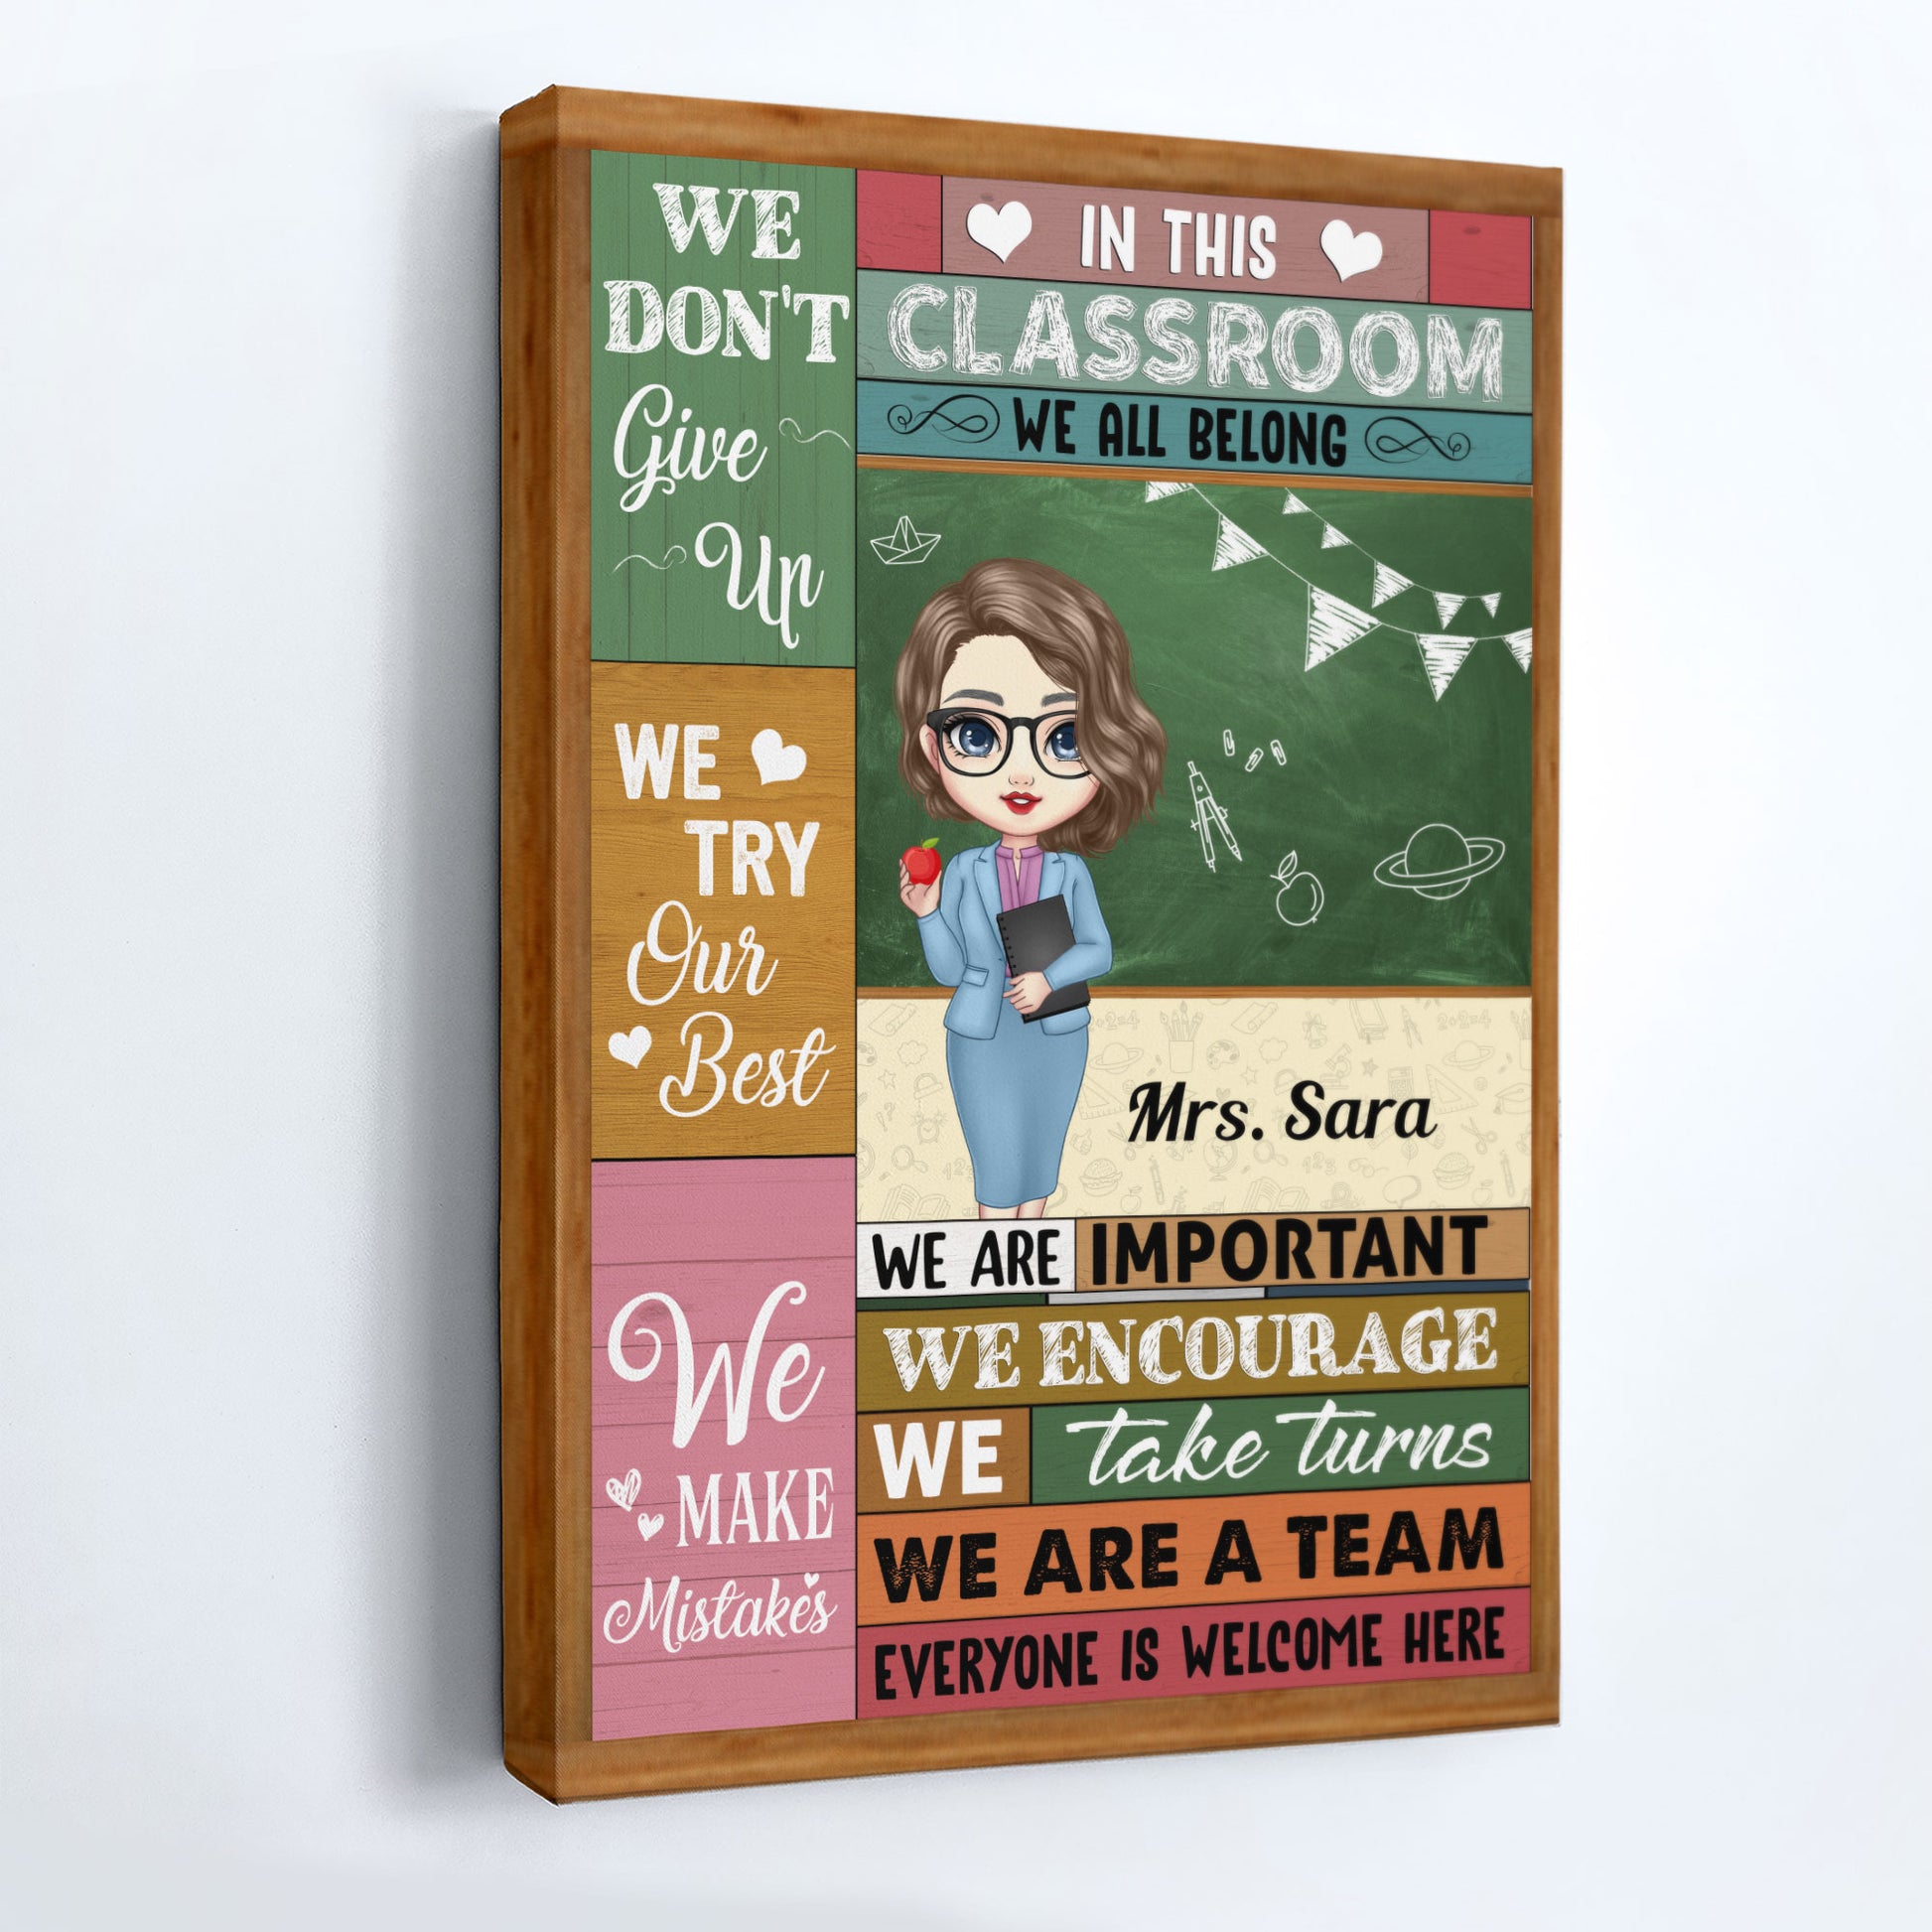 In This Classroom We're A Team - Personalized Poster/Canvas - Christmas, Loving, Welcome Gift For Classrooms, Teachers & Students